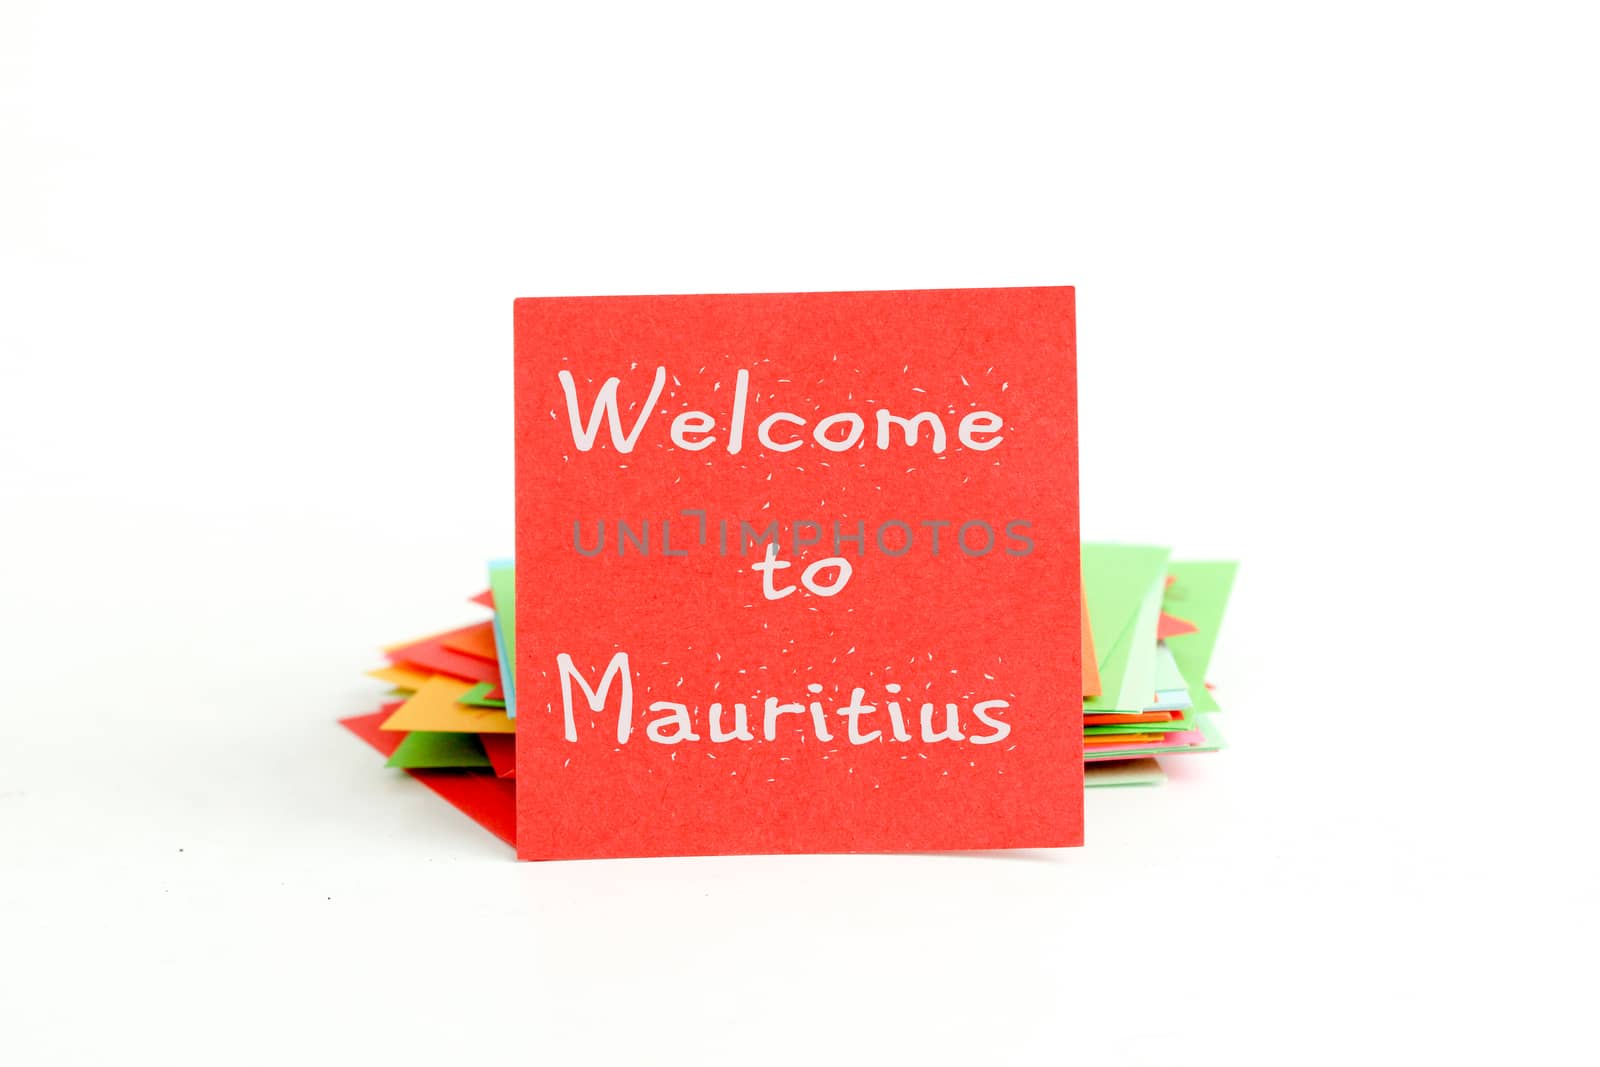 picture of a red note paper with text welcome to mauritius